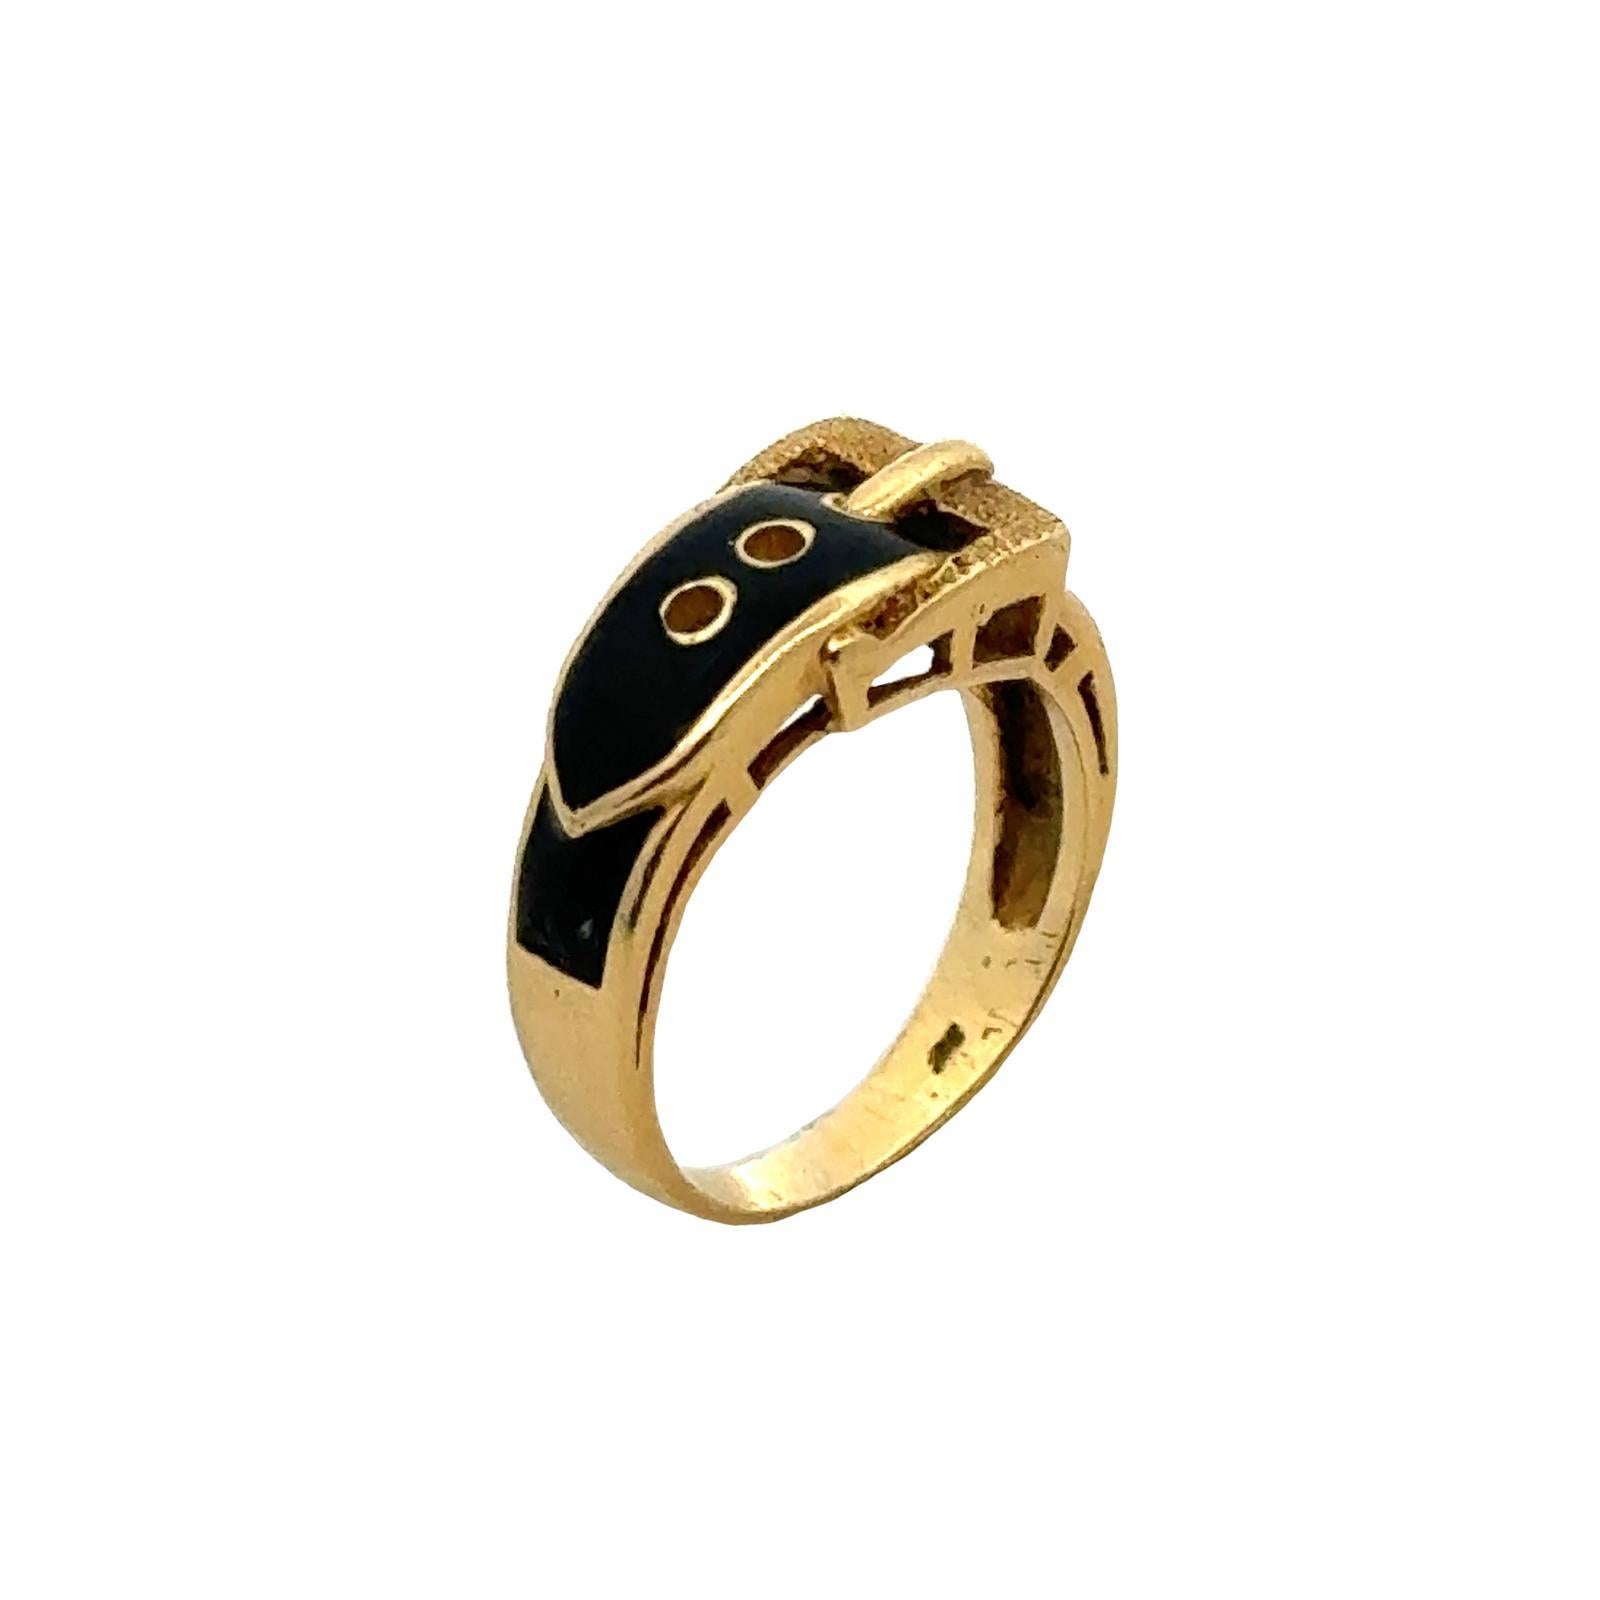 Black Enamel 18 Karat Yellow Gold Vintage Buckle Band Ring In Good Condition For Sale In Boca Raton, FL